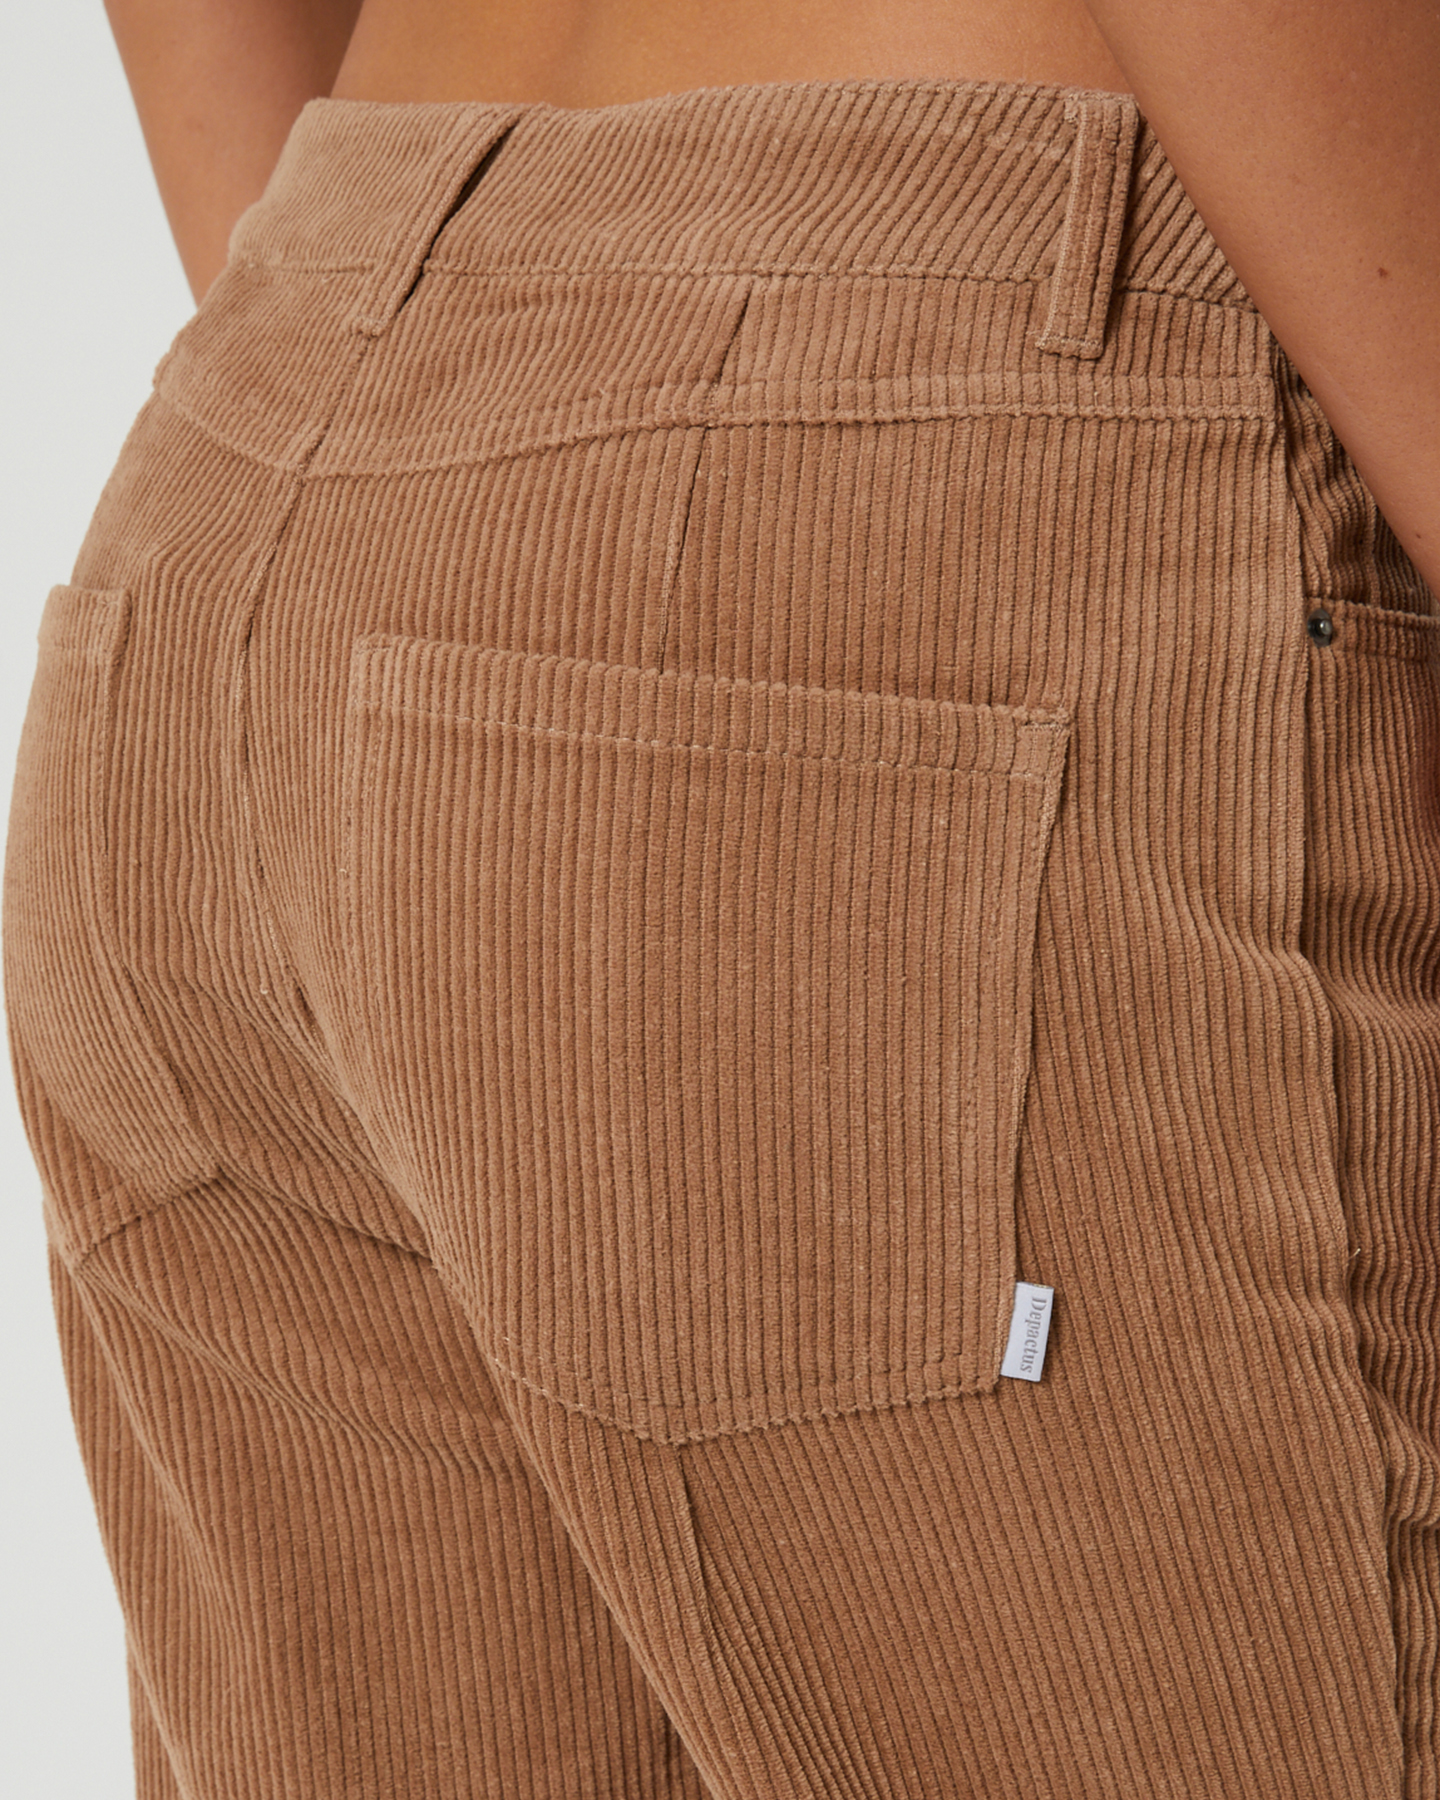 Depactus Cameron Cord Pant - Brown | SurfStitch